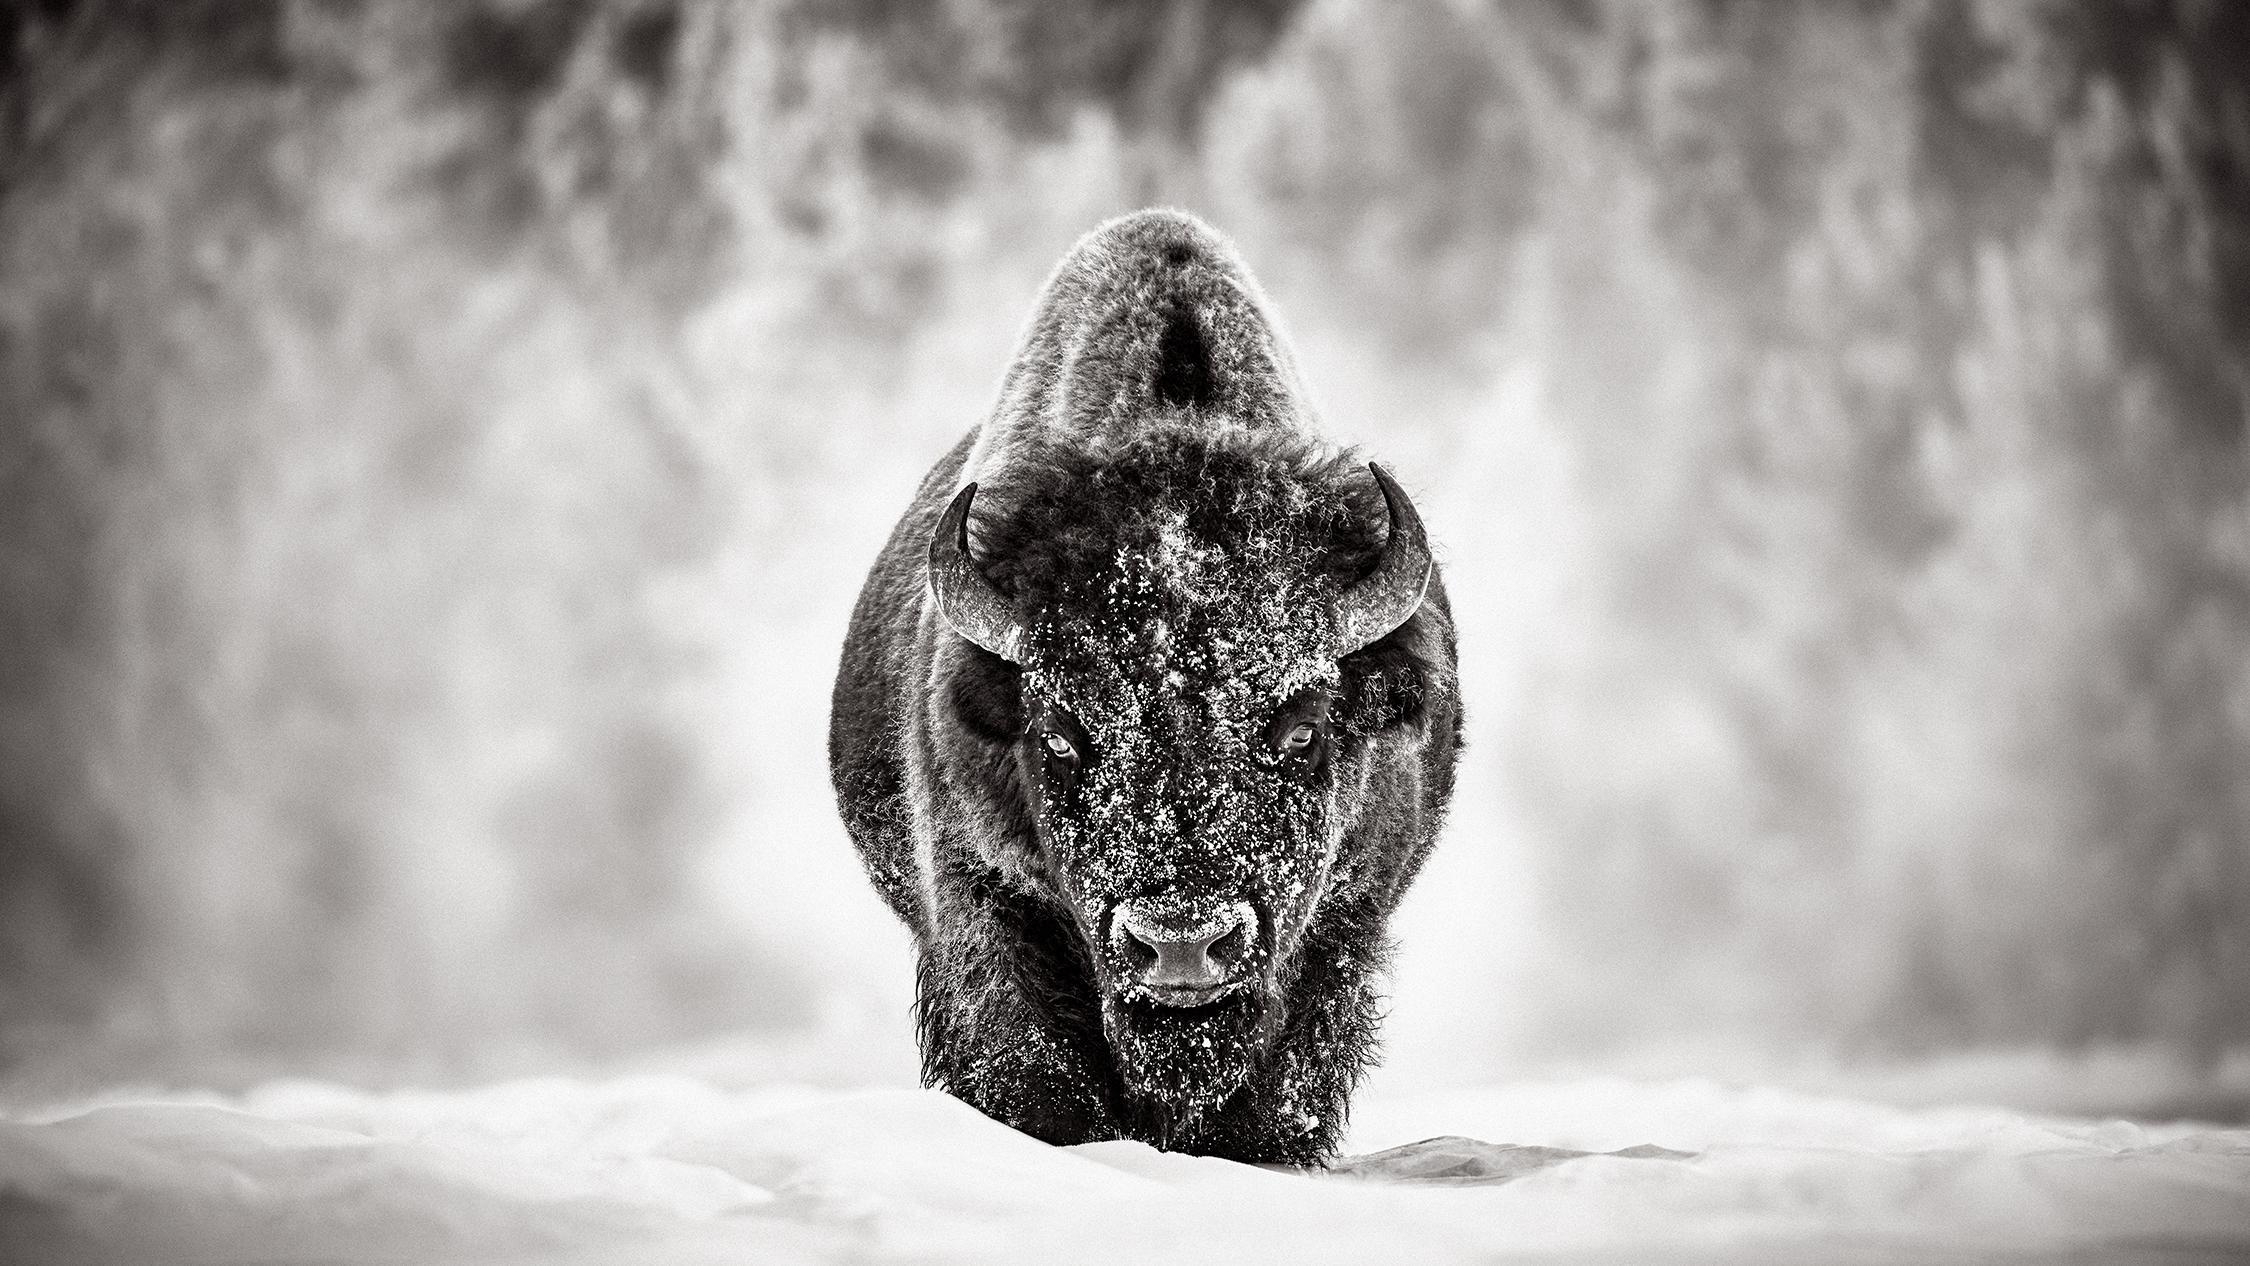 Drew Doggett Black and White Photograph - Unbelievable Portrait of a Bison in the Snow in Yellowstone National Park 